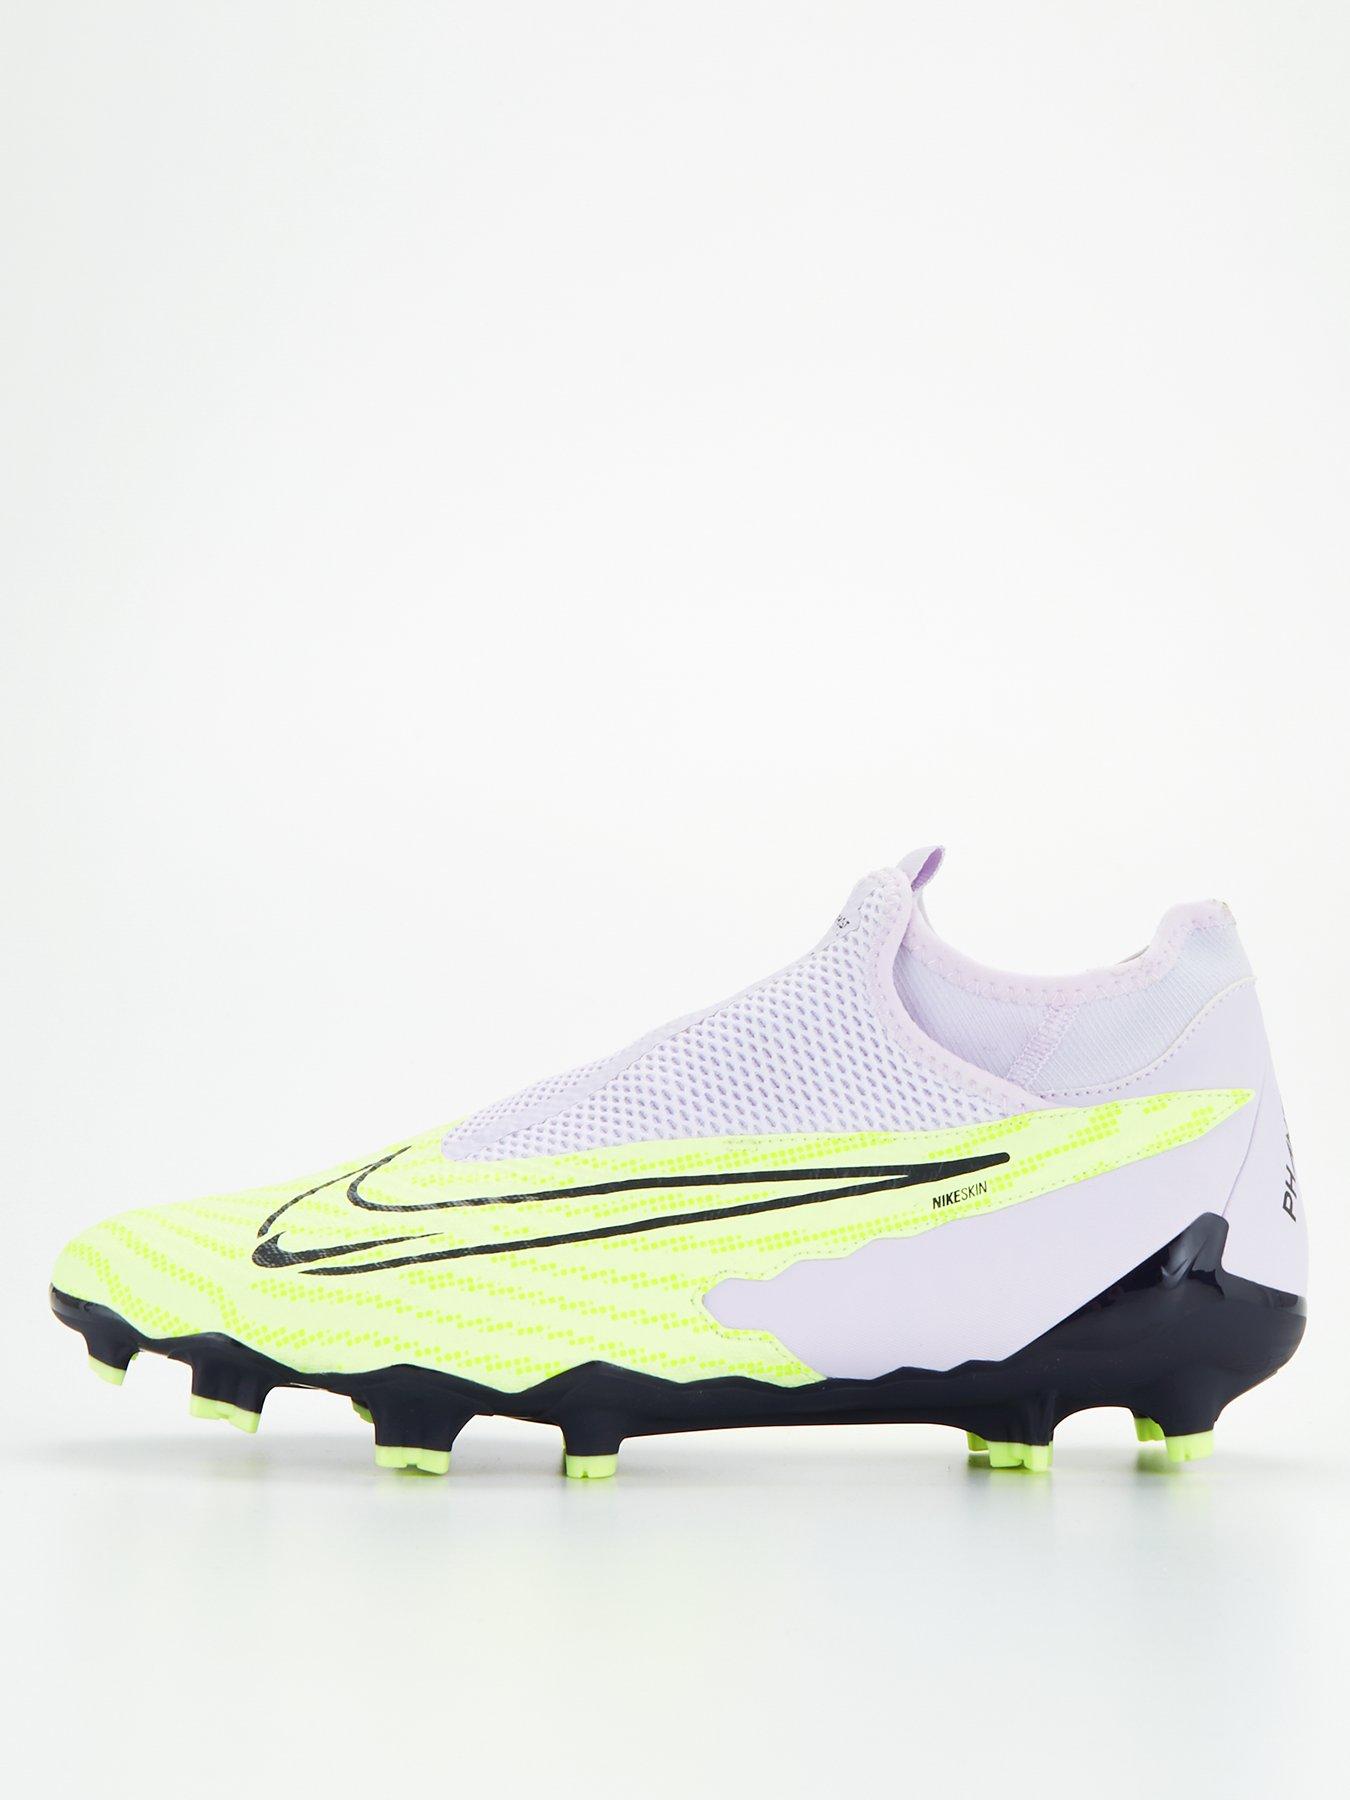 Football boots, Mens sports shoes, Sports & leisure